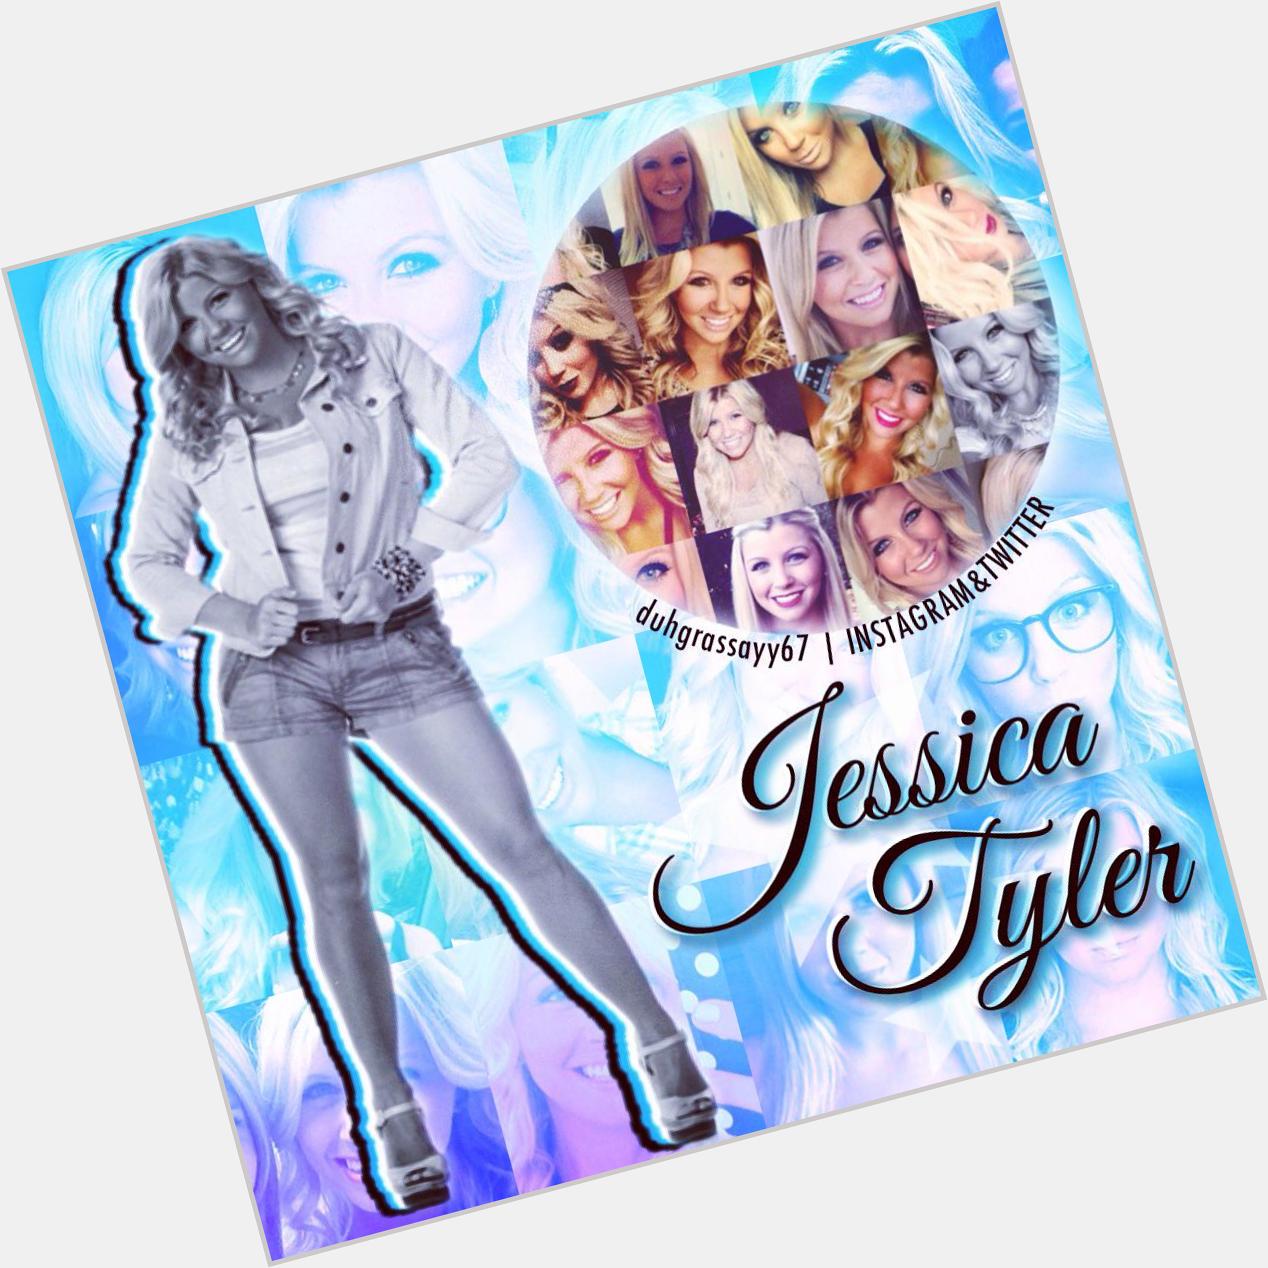 Happy Birthday to the lovely Jessica Tyler!     I hope you have had an amazing day!  